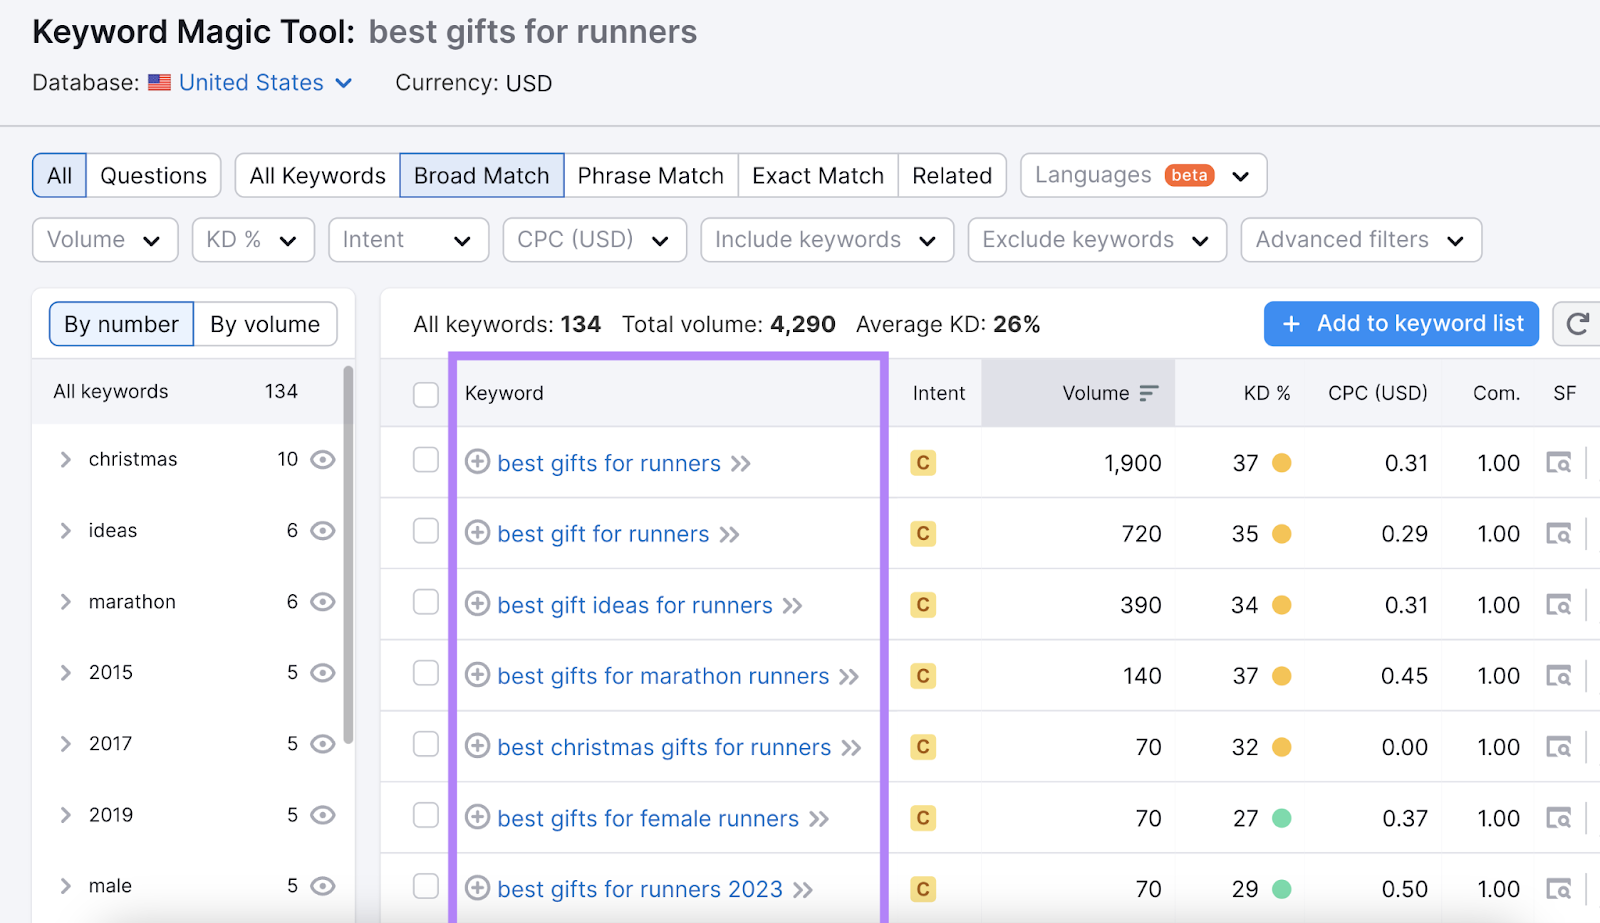 “best gifts for way   runners,” “best gifts for marathon runners,” “best gifts for caller   runners" and different   results with their metrics